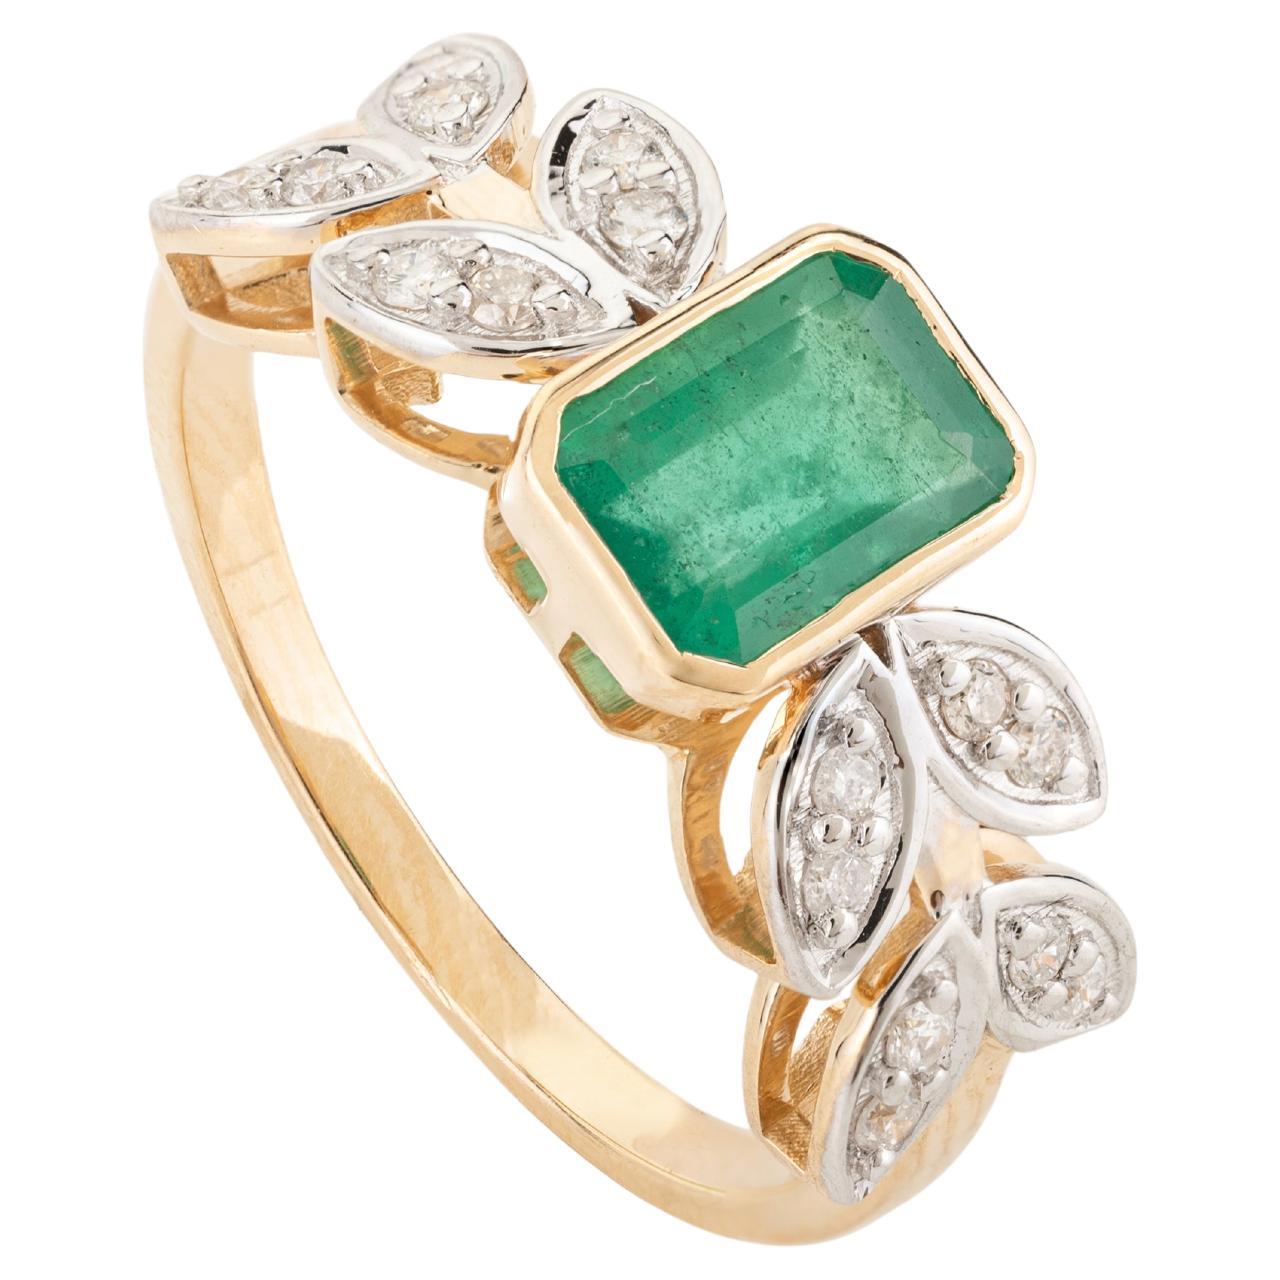 For Sale:  Natural Emerald and Diamond Floral Motif Band Ring in 18k Solid Yellow Gold